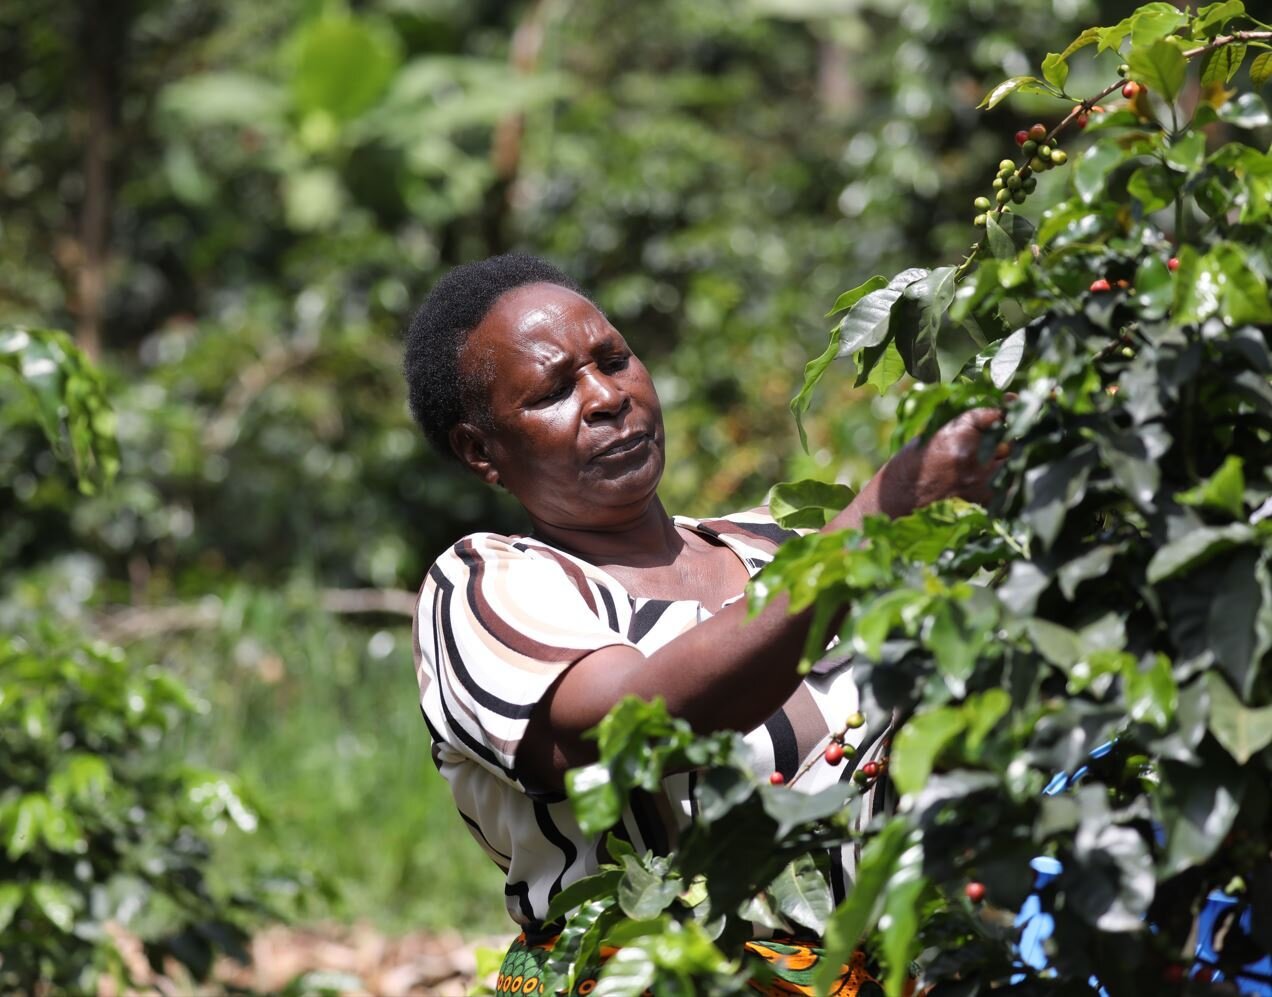 This is Phylis Gacheri. She is a team leader with @nguvu. She was helping us pick cherries on this day. Her role is to check the quality at each stage of the picking process. This group only work with female coffee producers in the Meru region of Ken